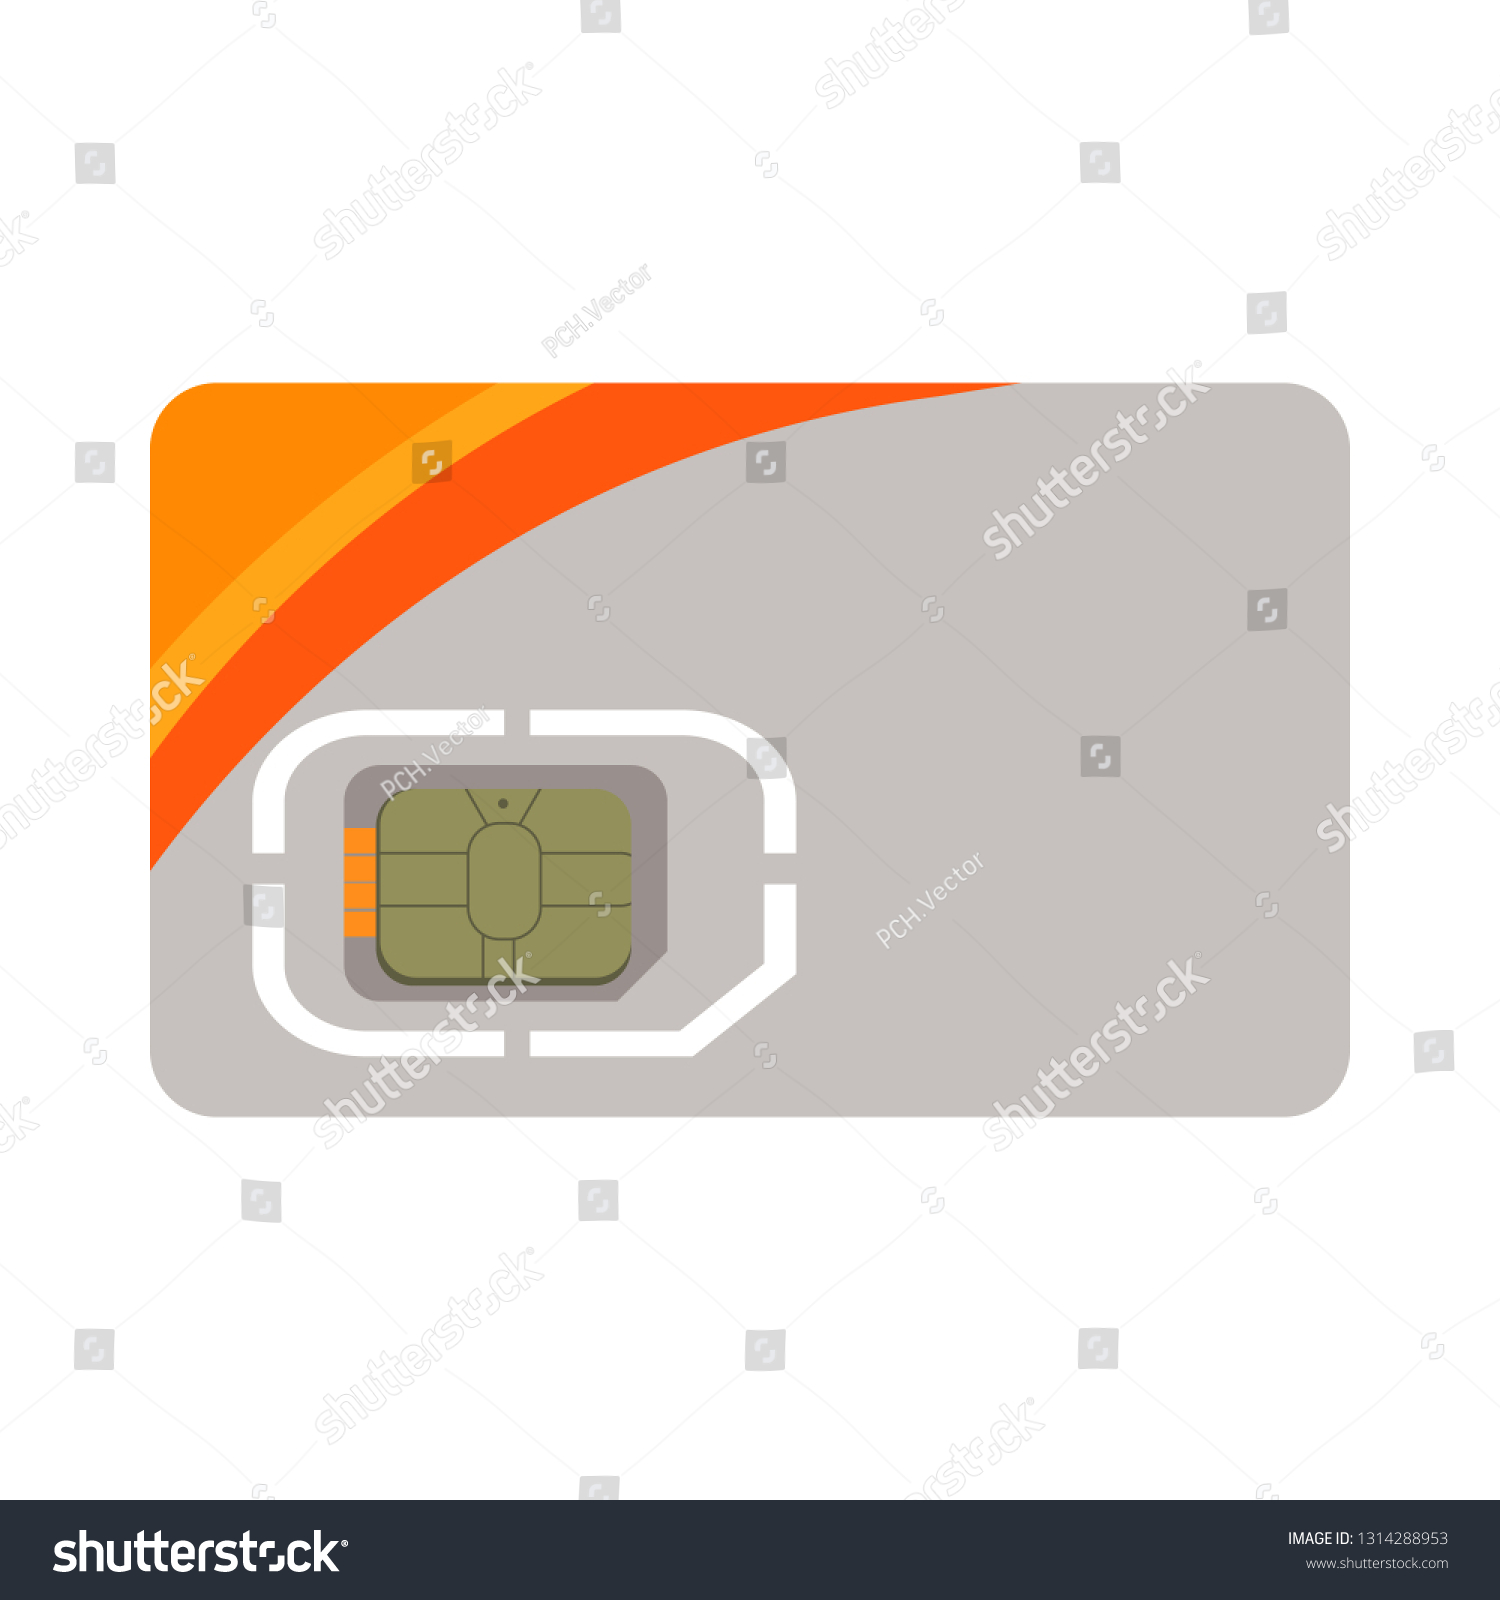 SIM card illustration. Devices, gadgets, electronics. Computer concept. Vector illustration can be used for topics like modern life, progress #1314288953